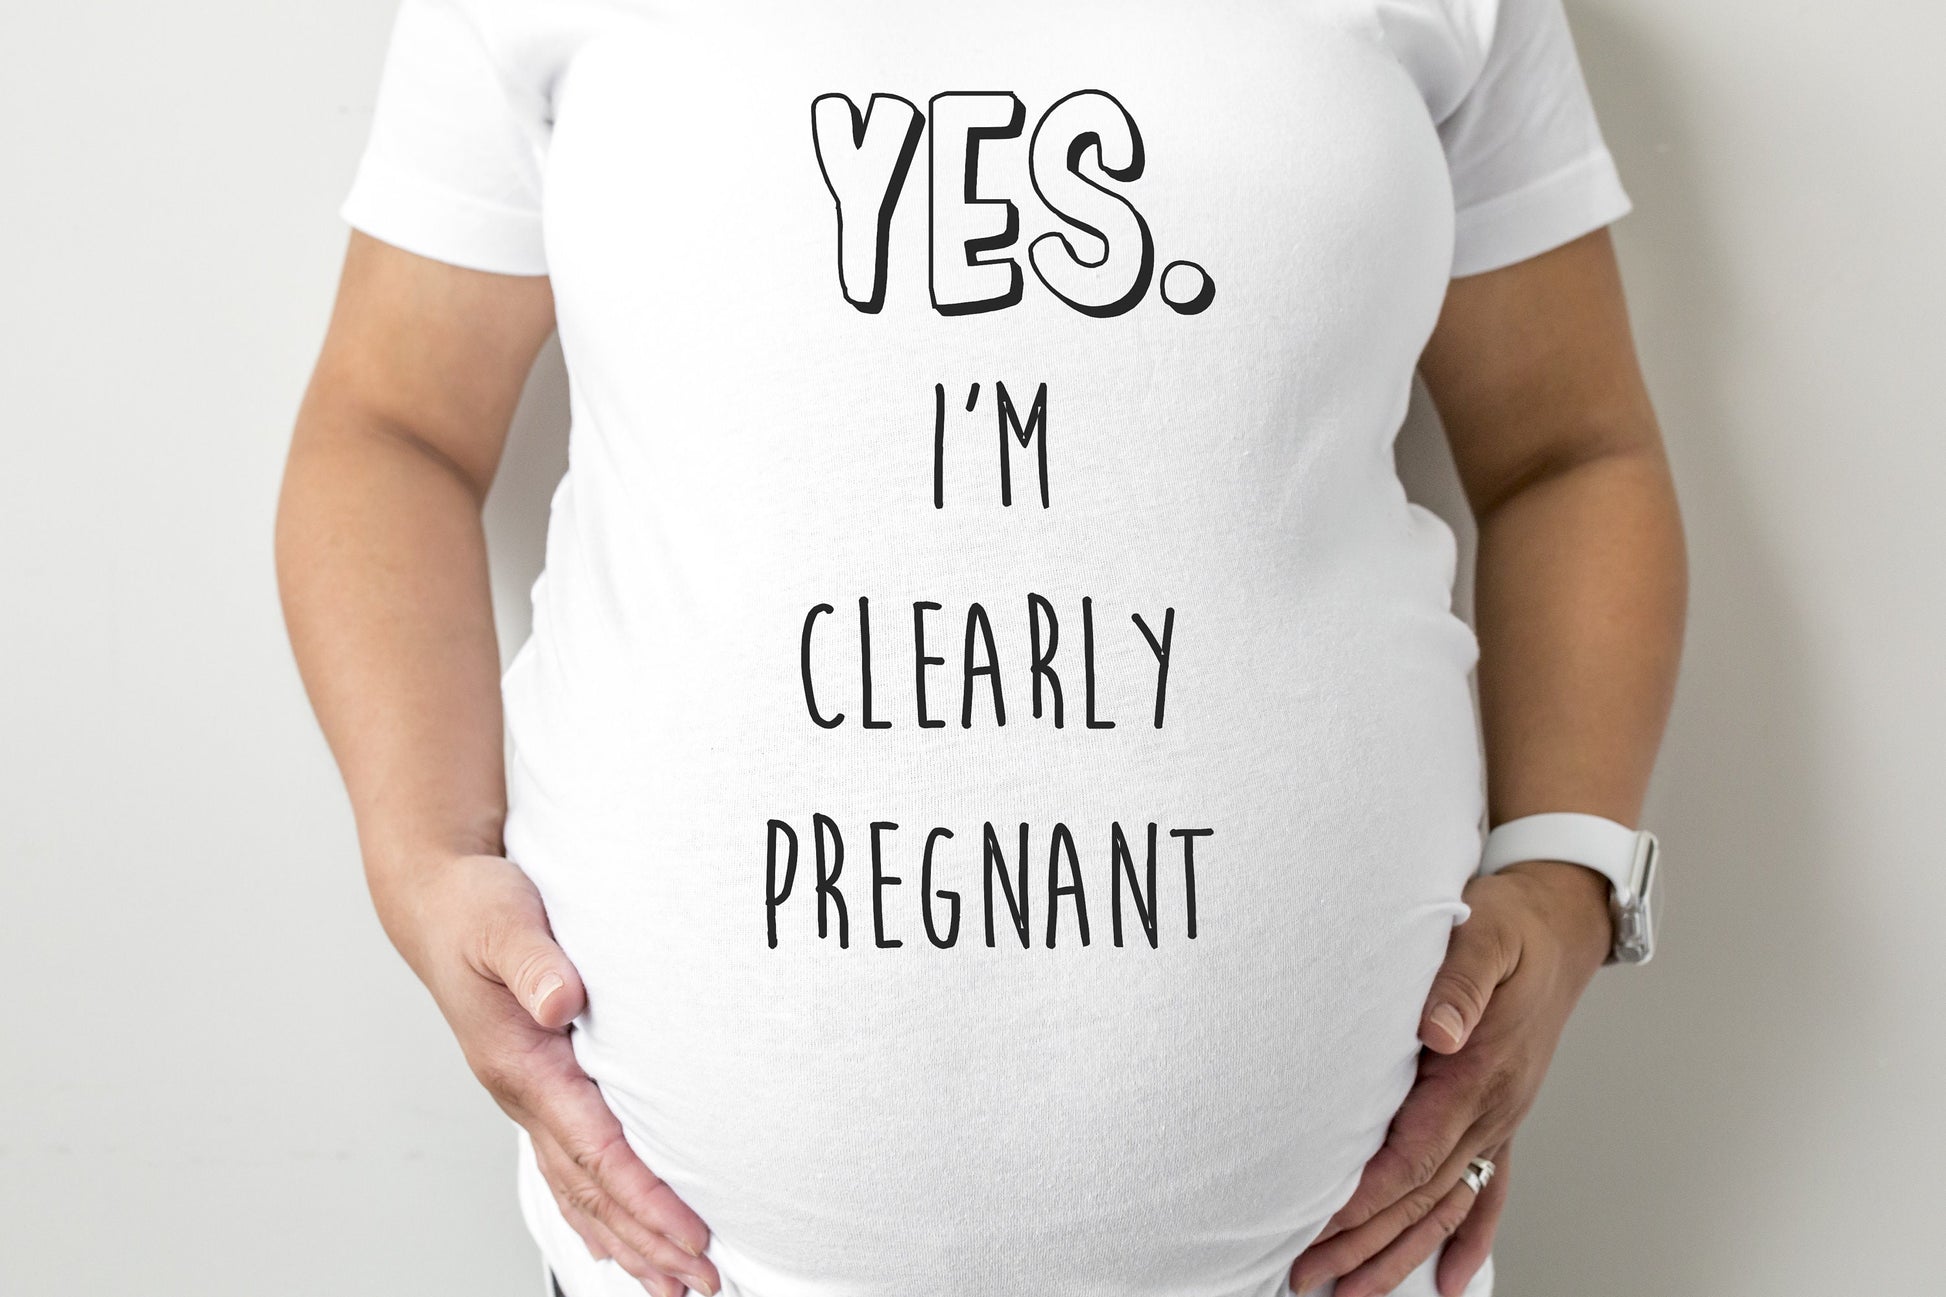 Yes I'm Clearly Pregnant Maternity T-Shirt - maternity cut shirt with ruched sides - funny pregnancy shirt - funny maternity tee